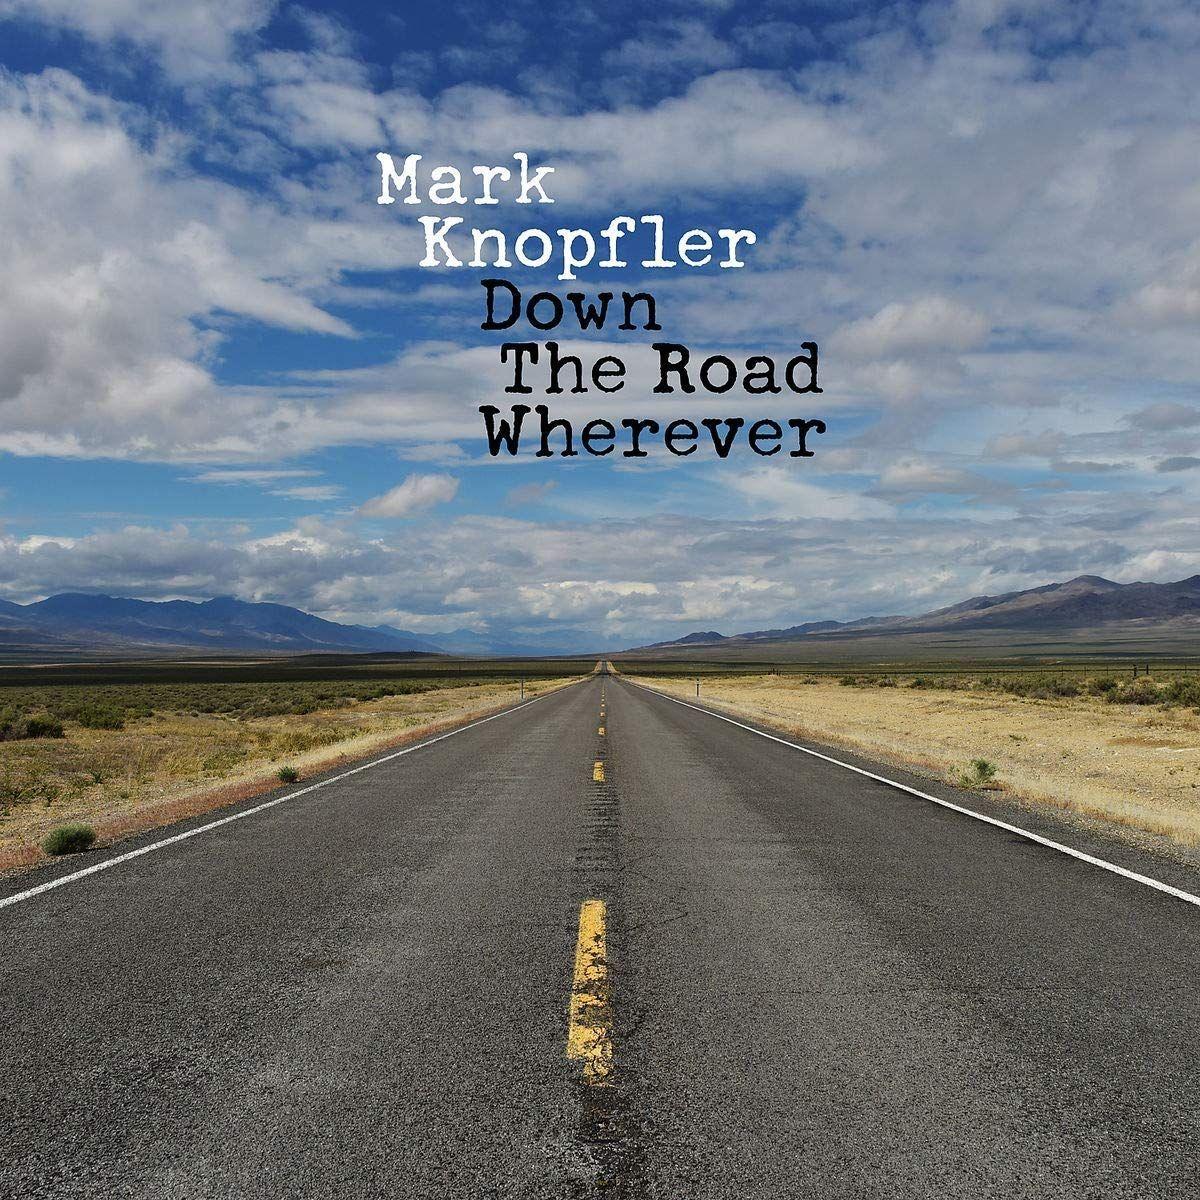 Cover of "Down the Road Wherever" by Mark Knopfler